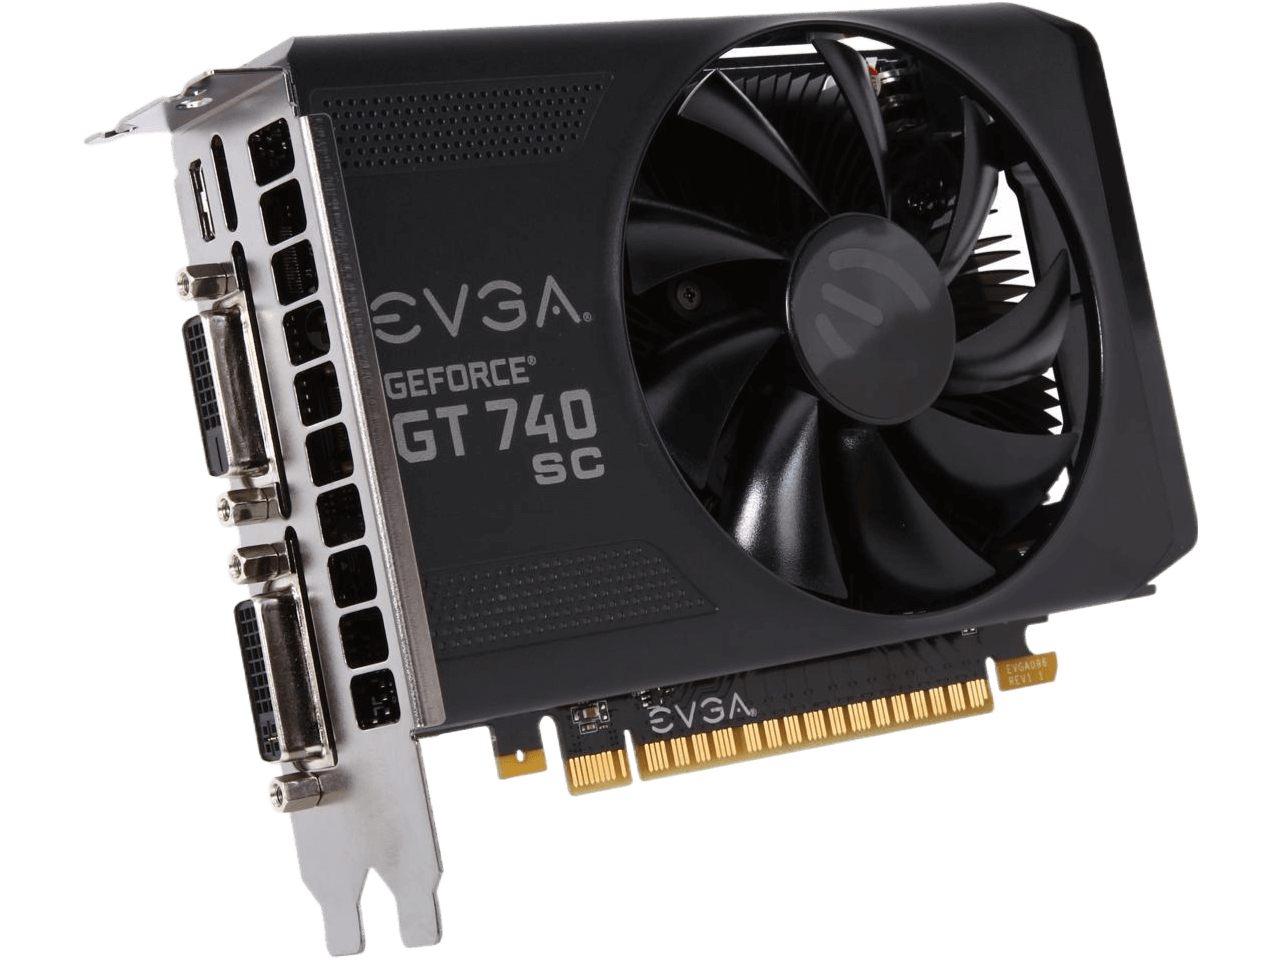 EVGA GeForce GT 740 Superclocked Dual Slot 2GB DDR3 Graphics Cards 02G-P4-2743-KR